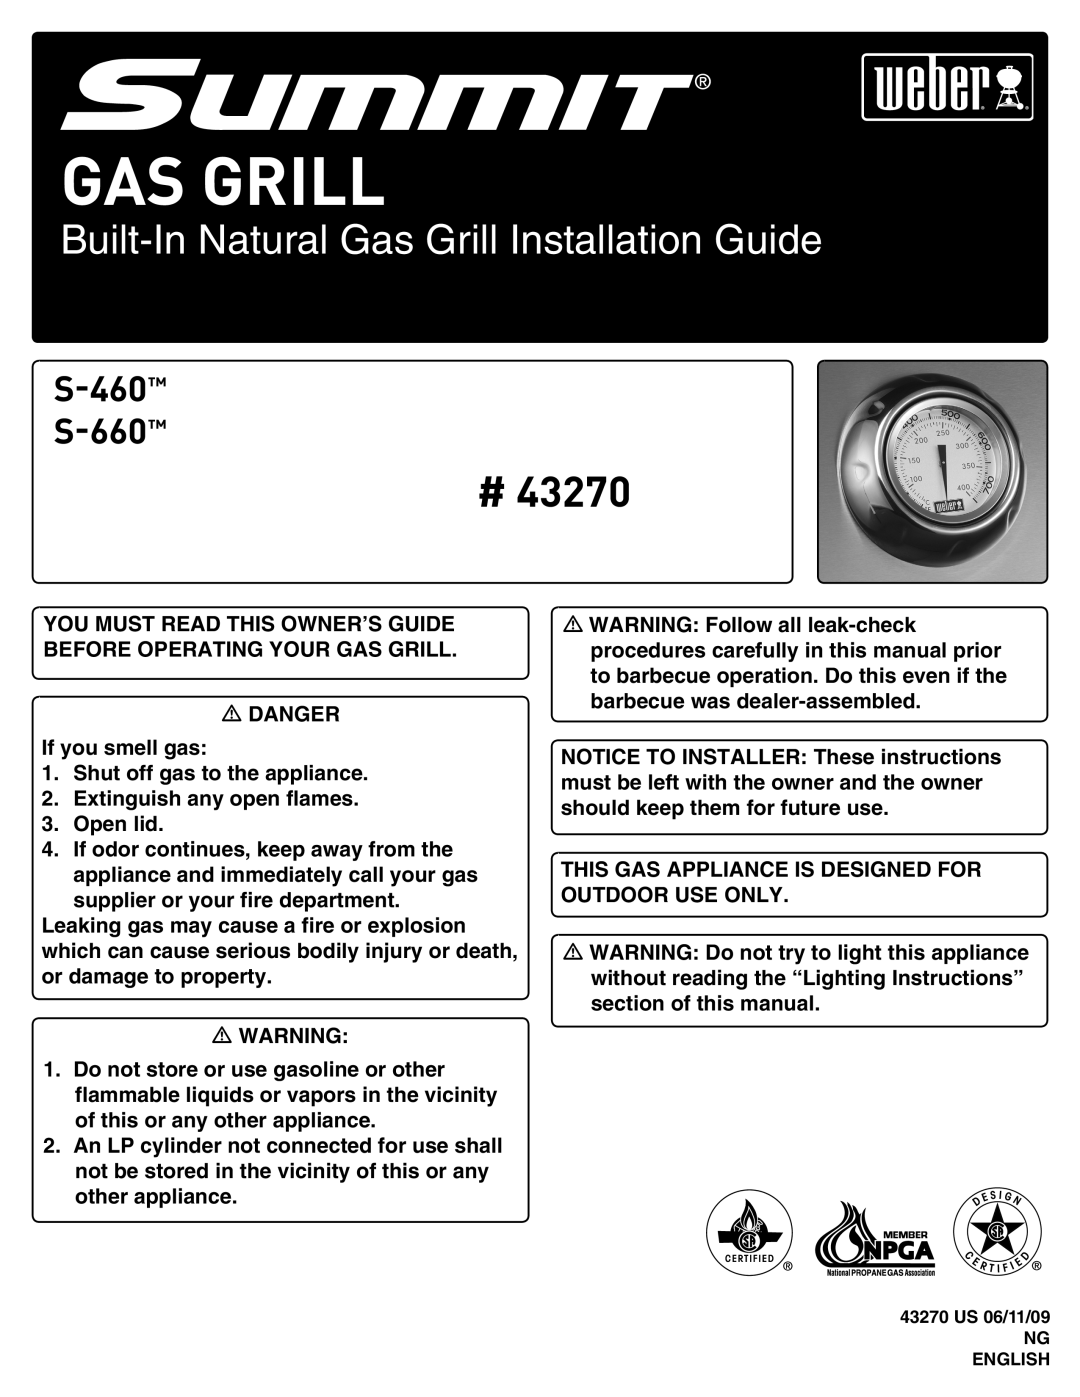 Weber 43270 manual Built-In Natural Gas Grill Installation Guide, S-460 S-660 